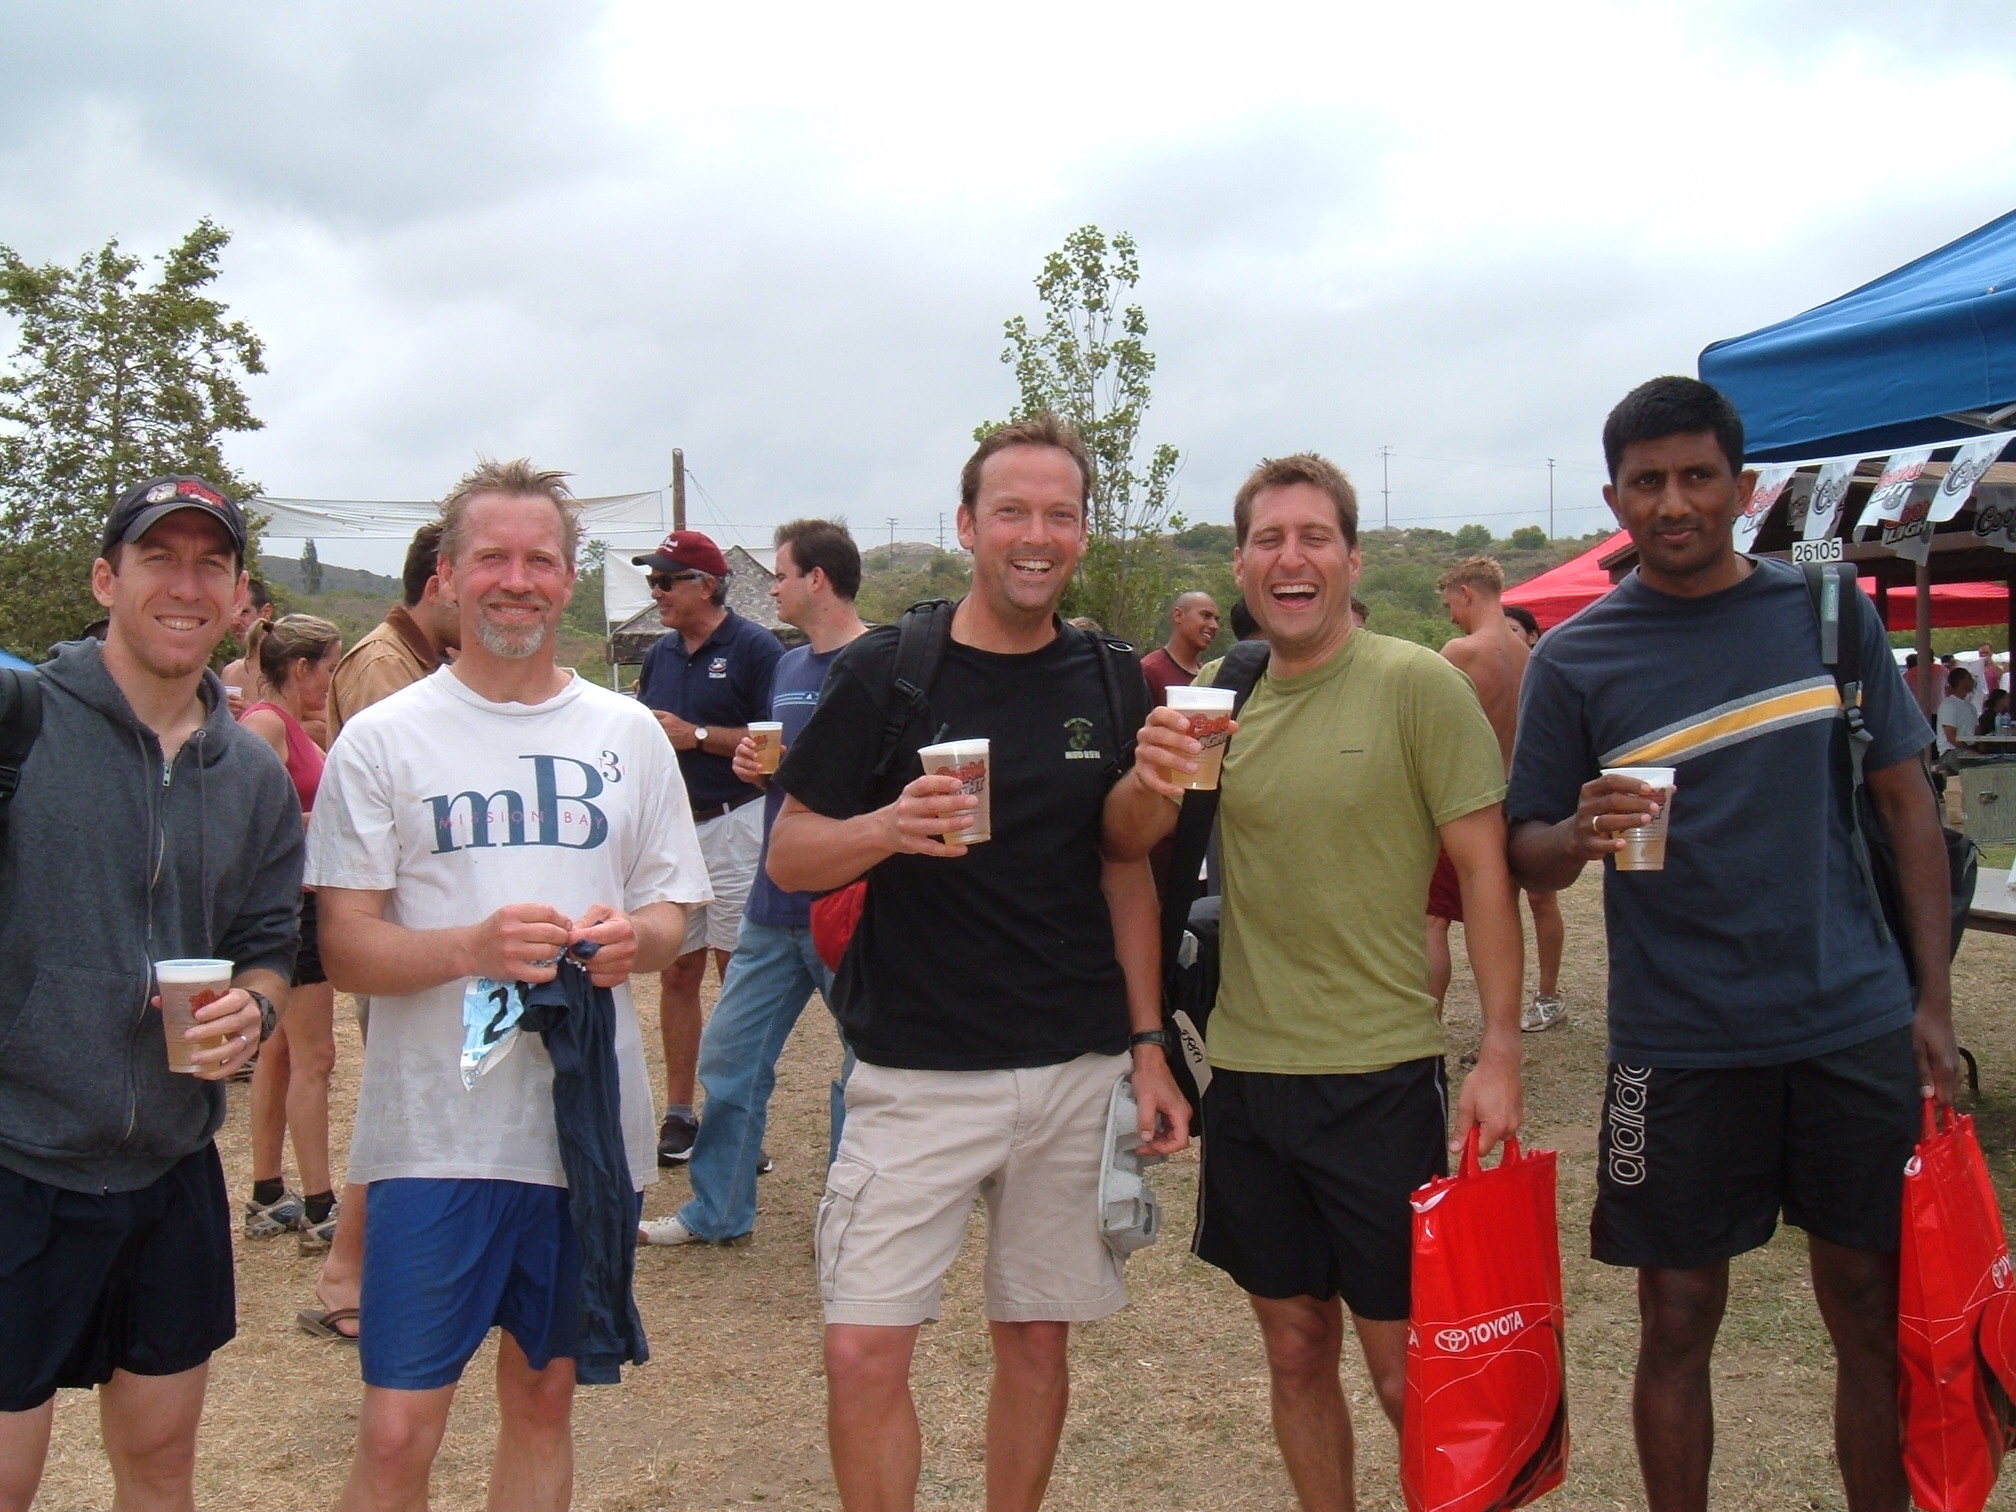 Engineers on a day of recreation at the beach drinking bear